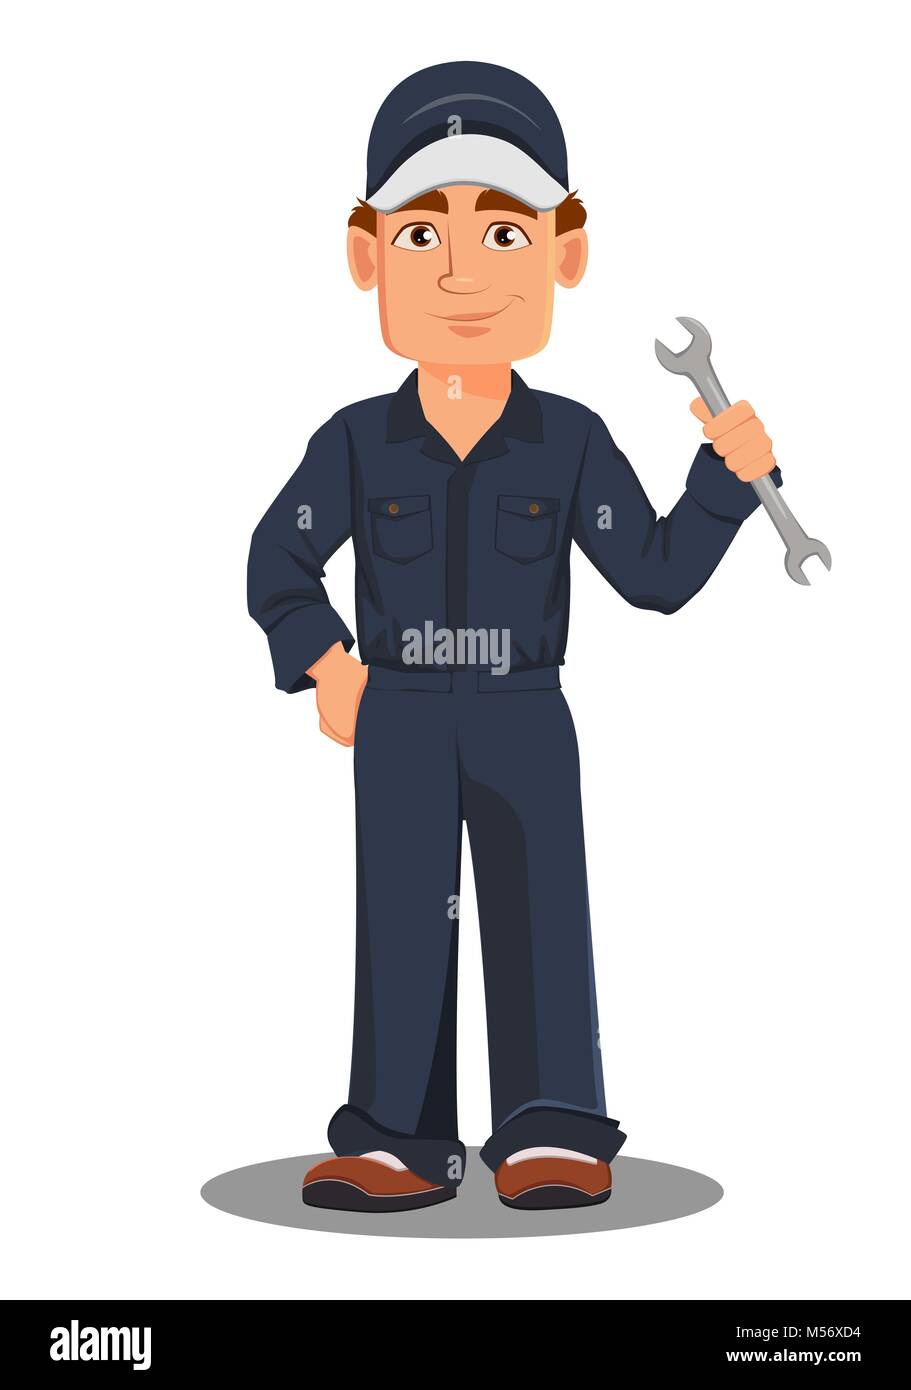 Professional auto mechanic in uniform. Smiling cartoon character holding wrench. Expert service worker. Vector illustration Stock Vector